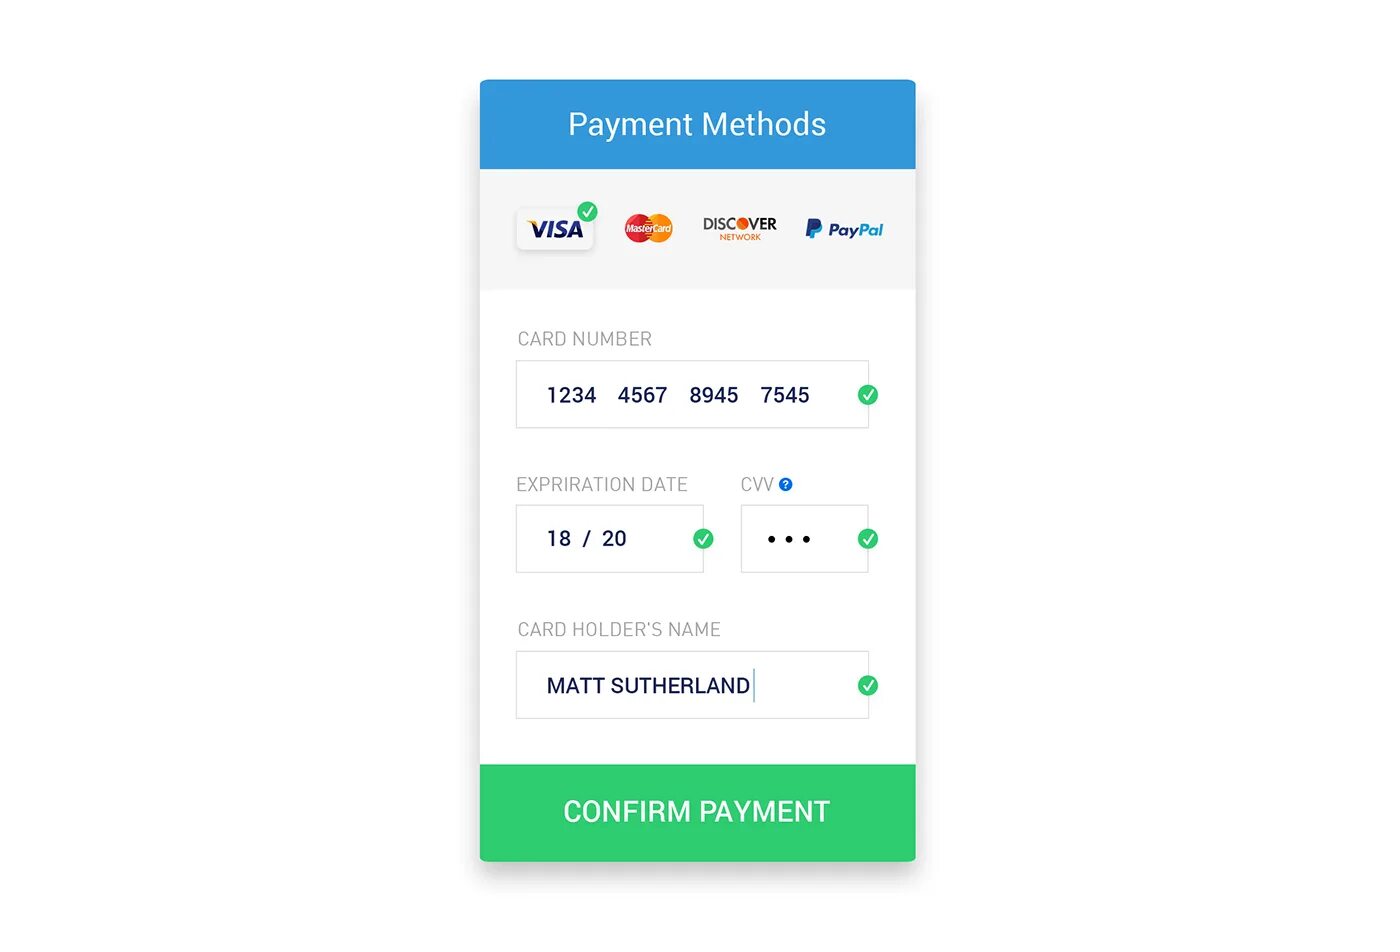 Paying methods. Payment method. Payment UI UX. Payment method UI. Payment methods UI/UX.